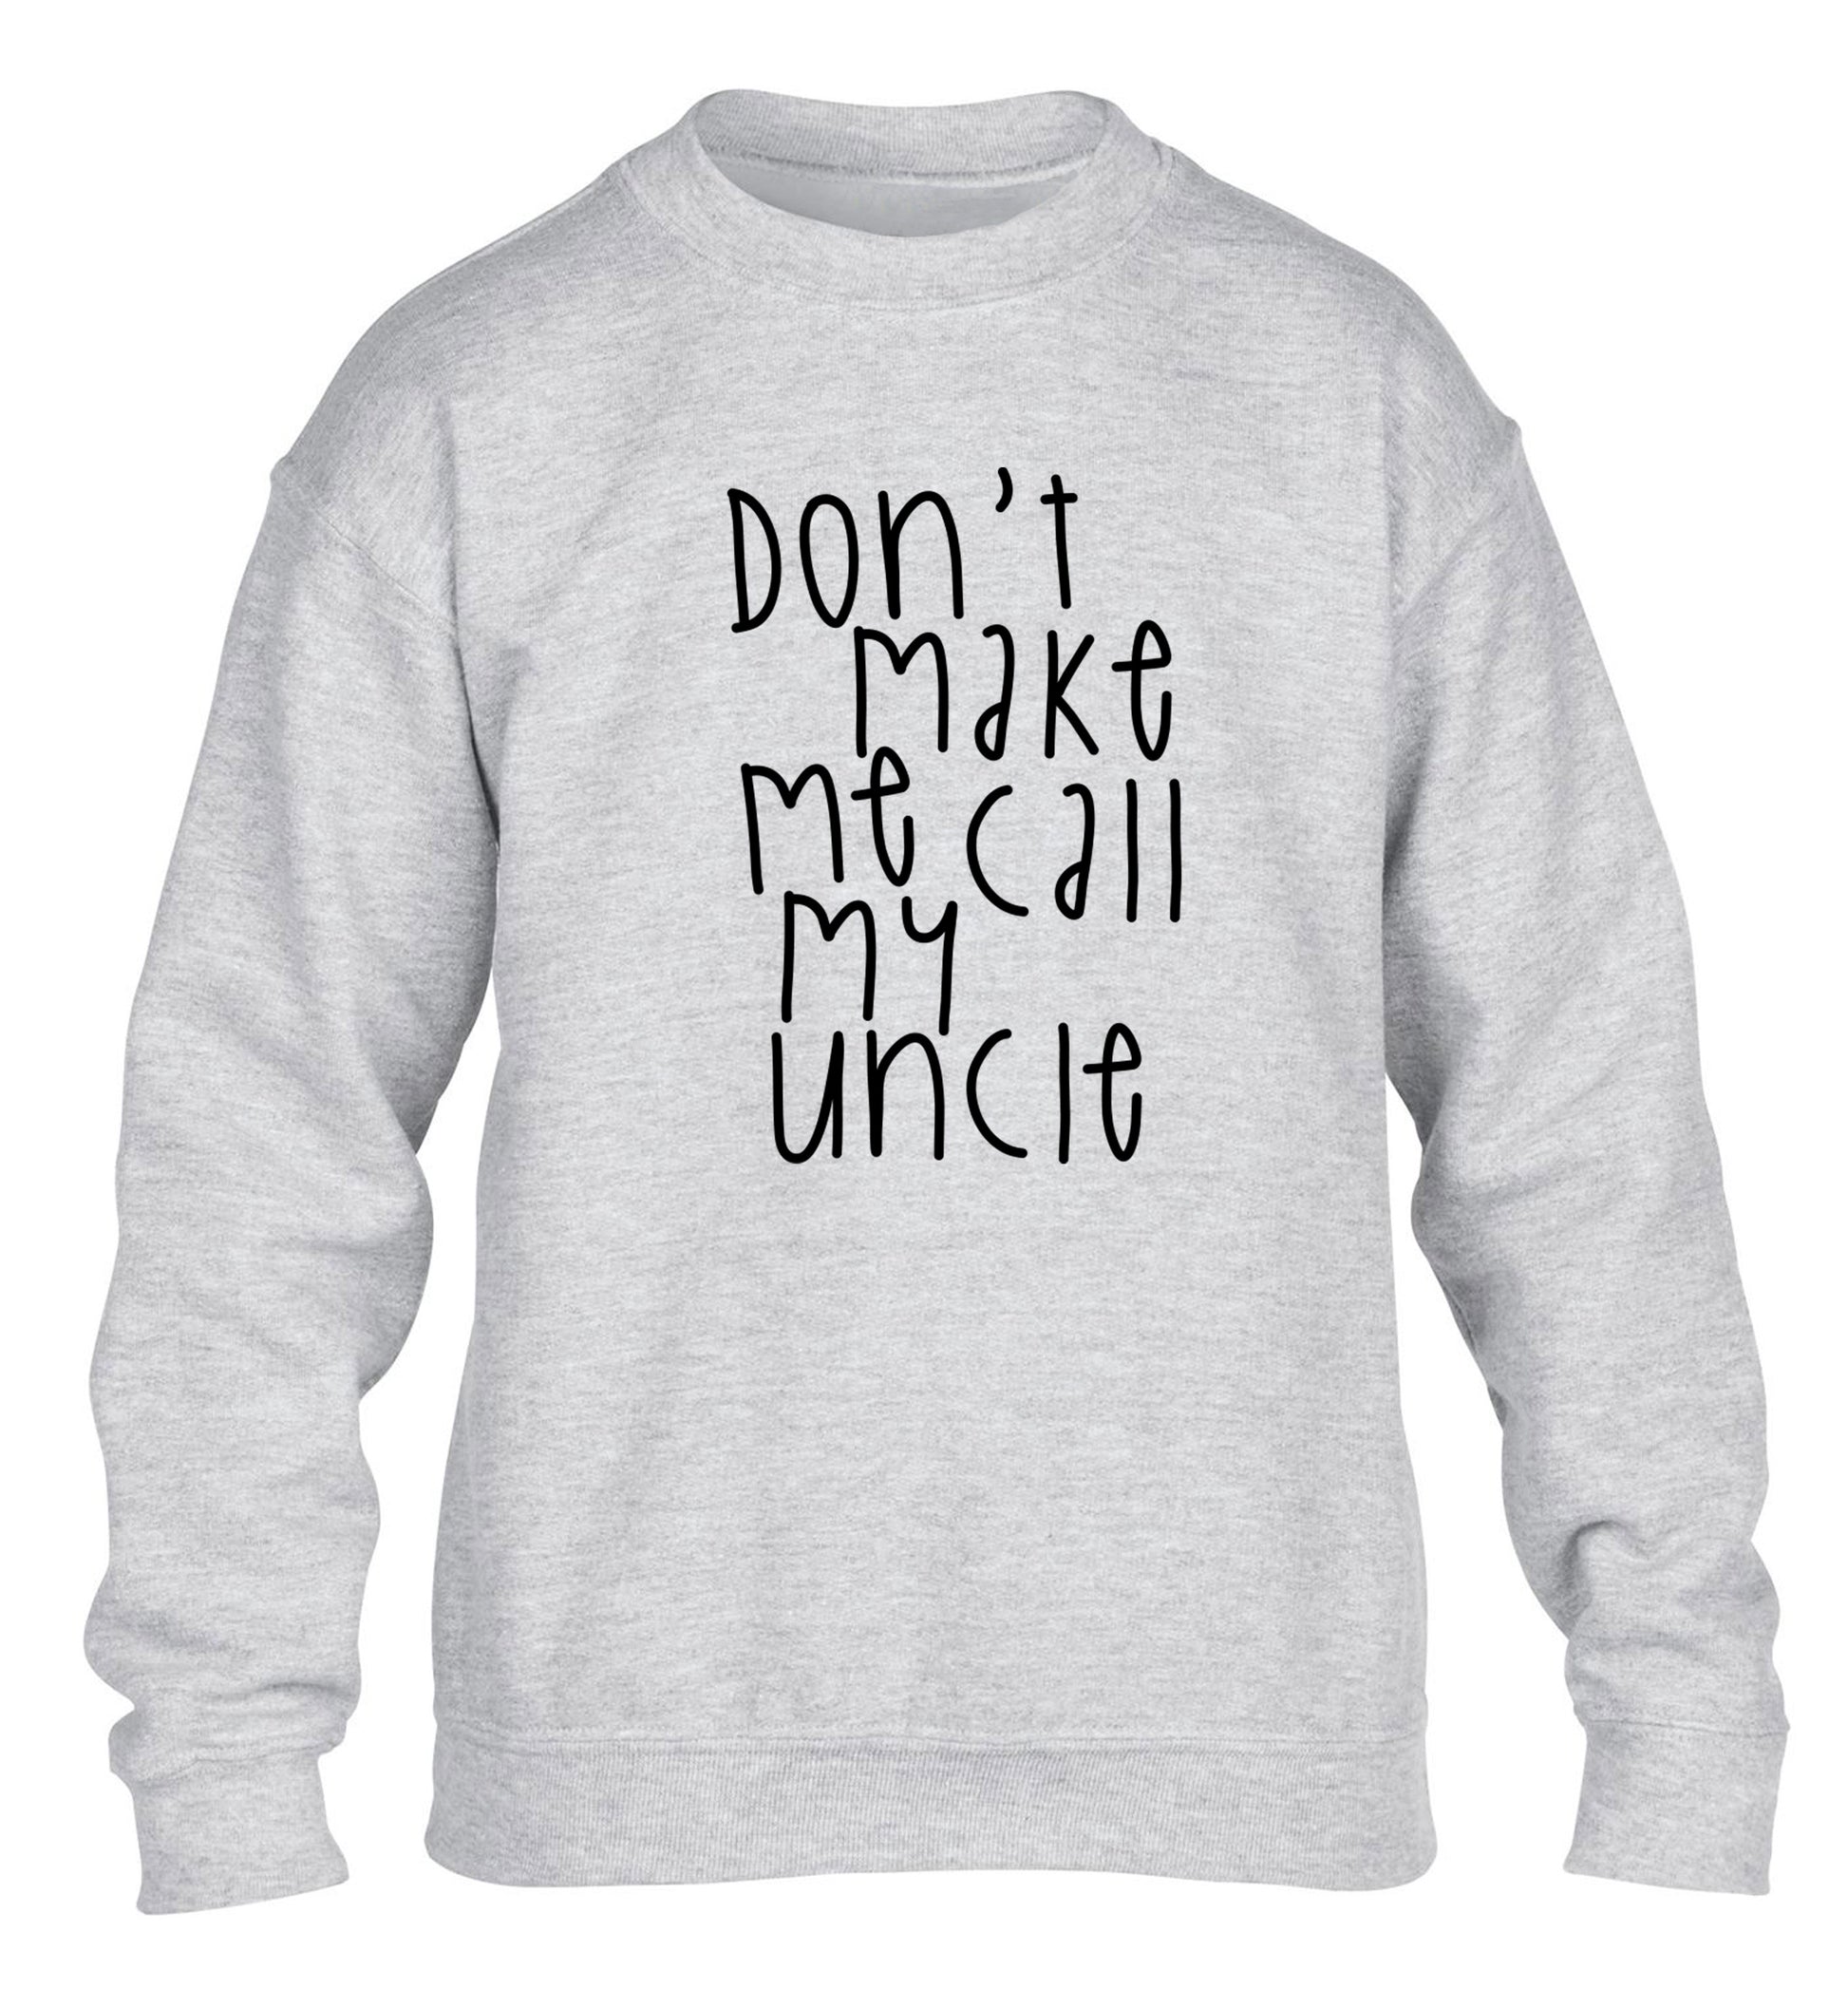 Don't make me call my uncle children's grey sweater 12-14 Years